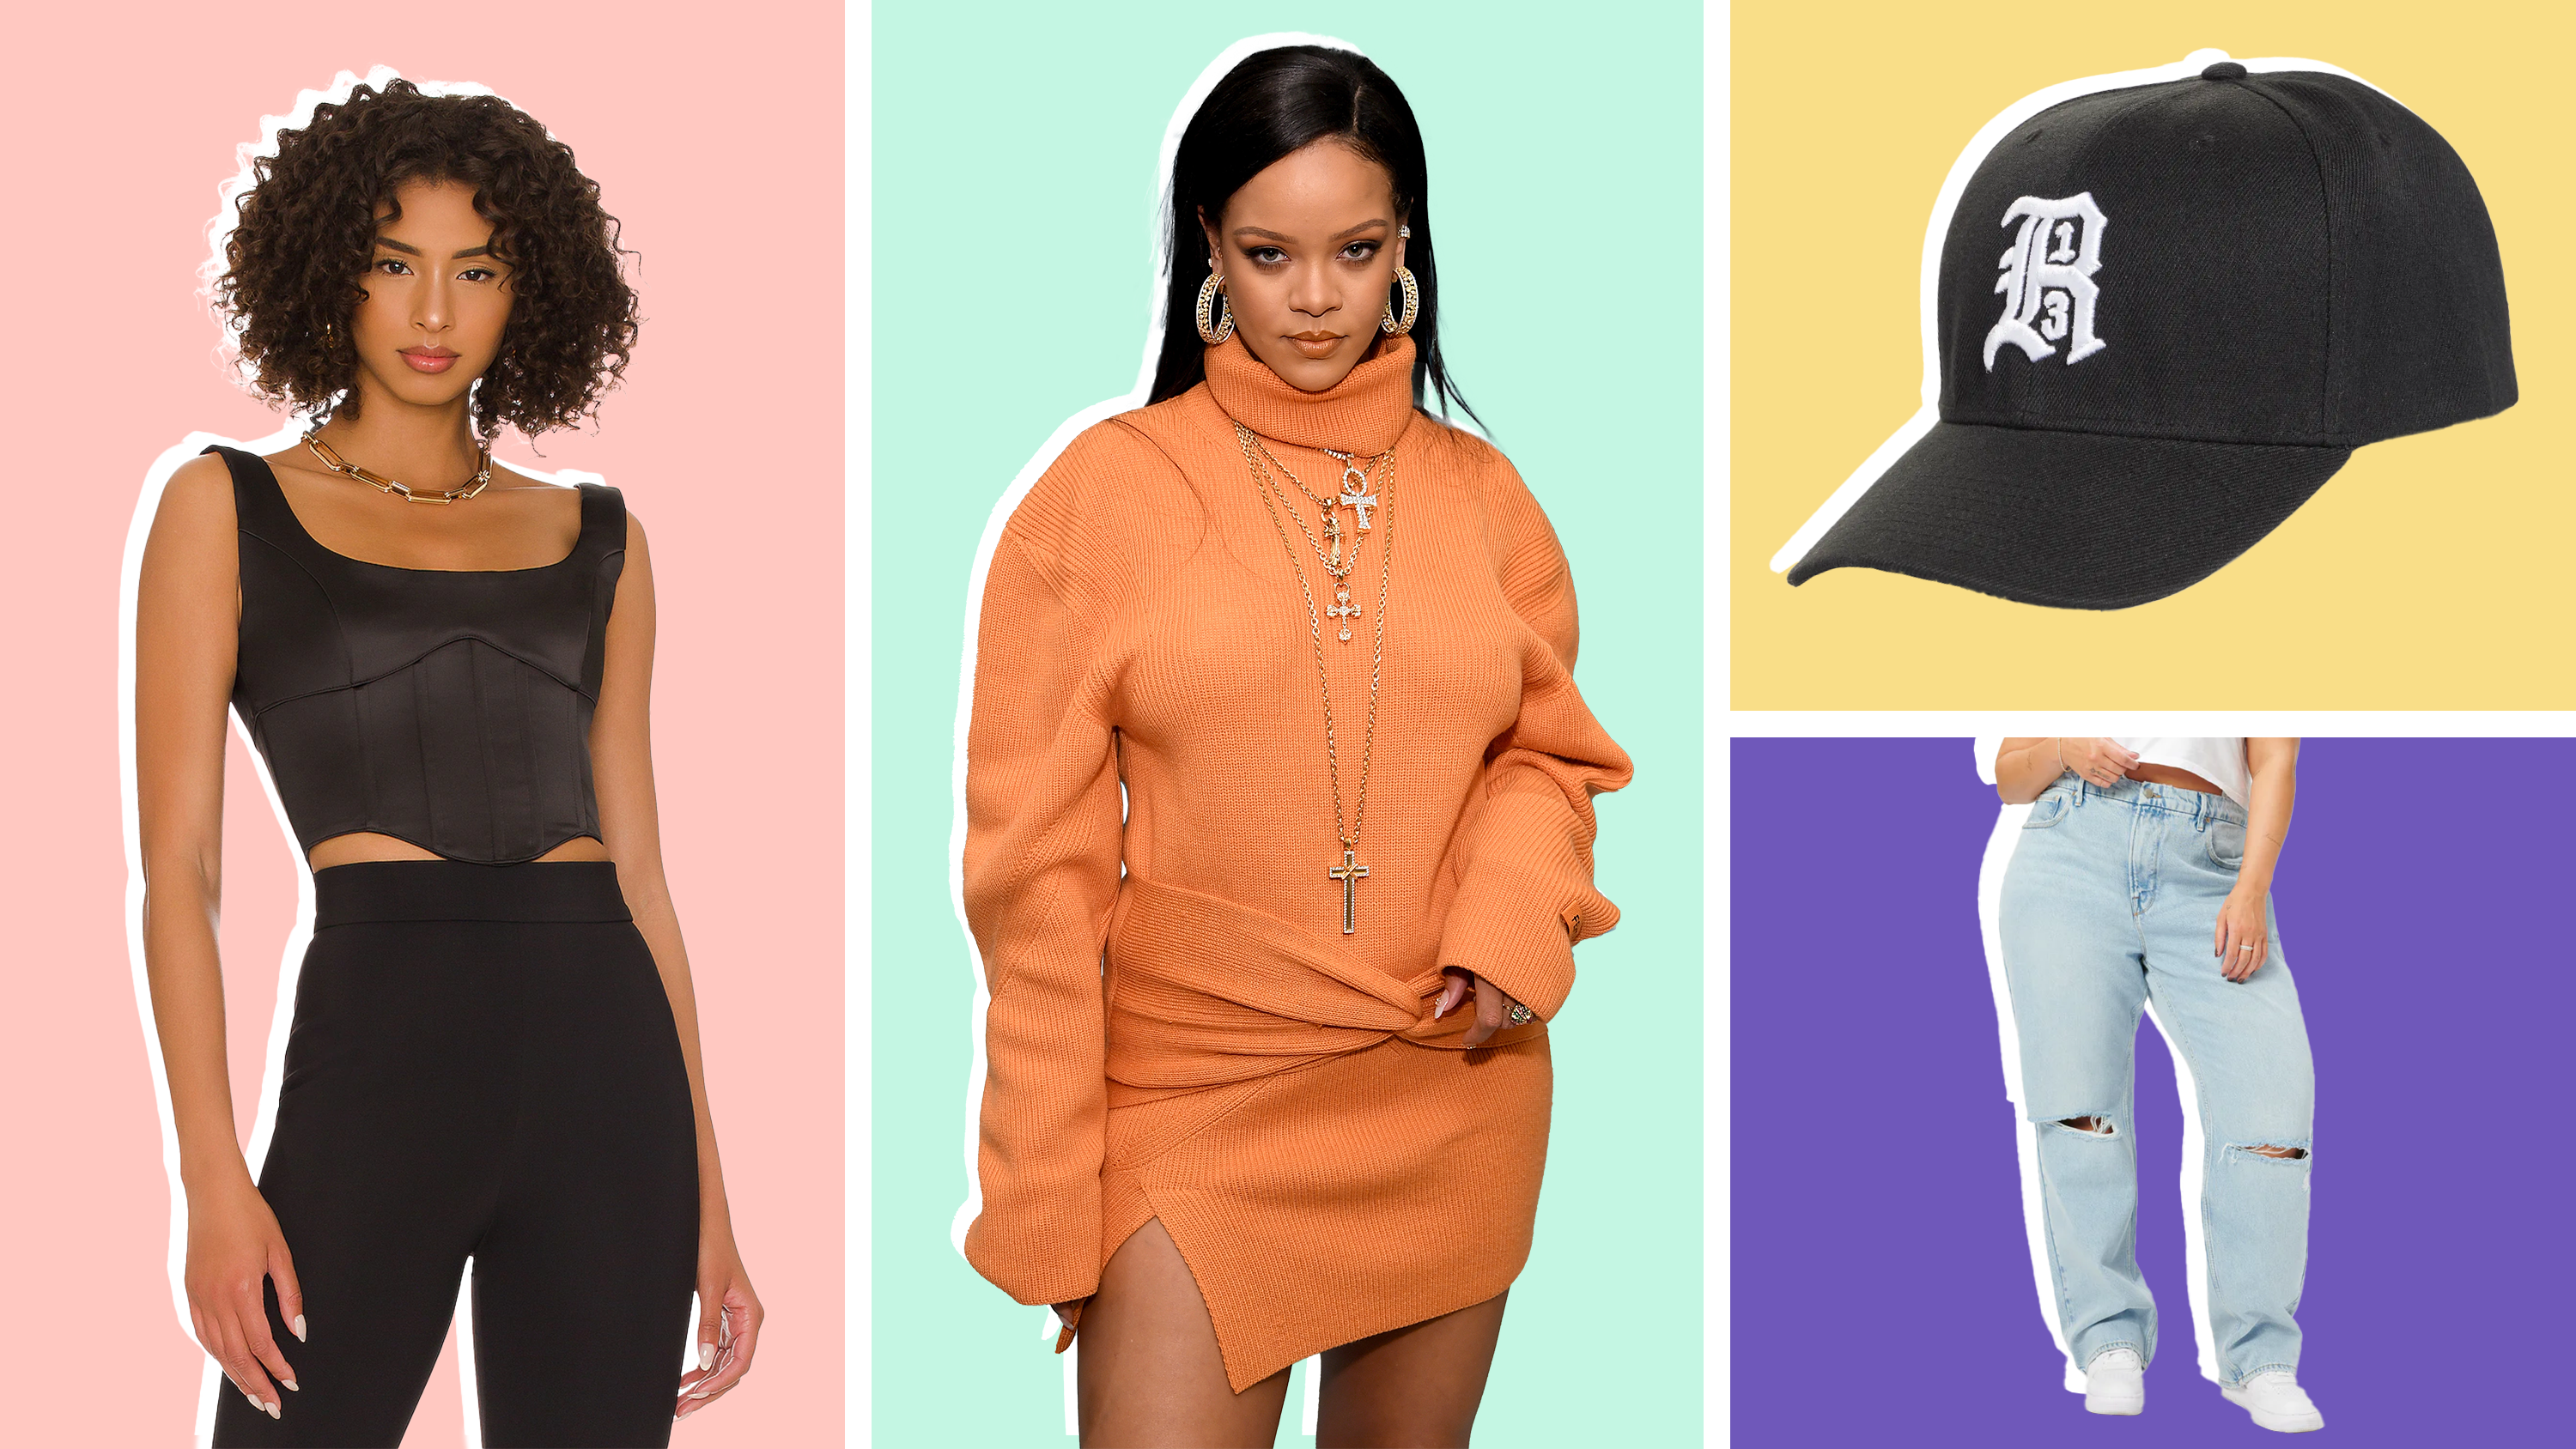 Style lessons we can learn from Rihanna thumbnail